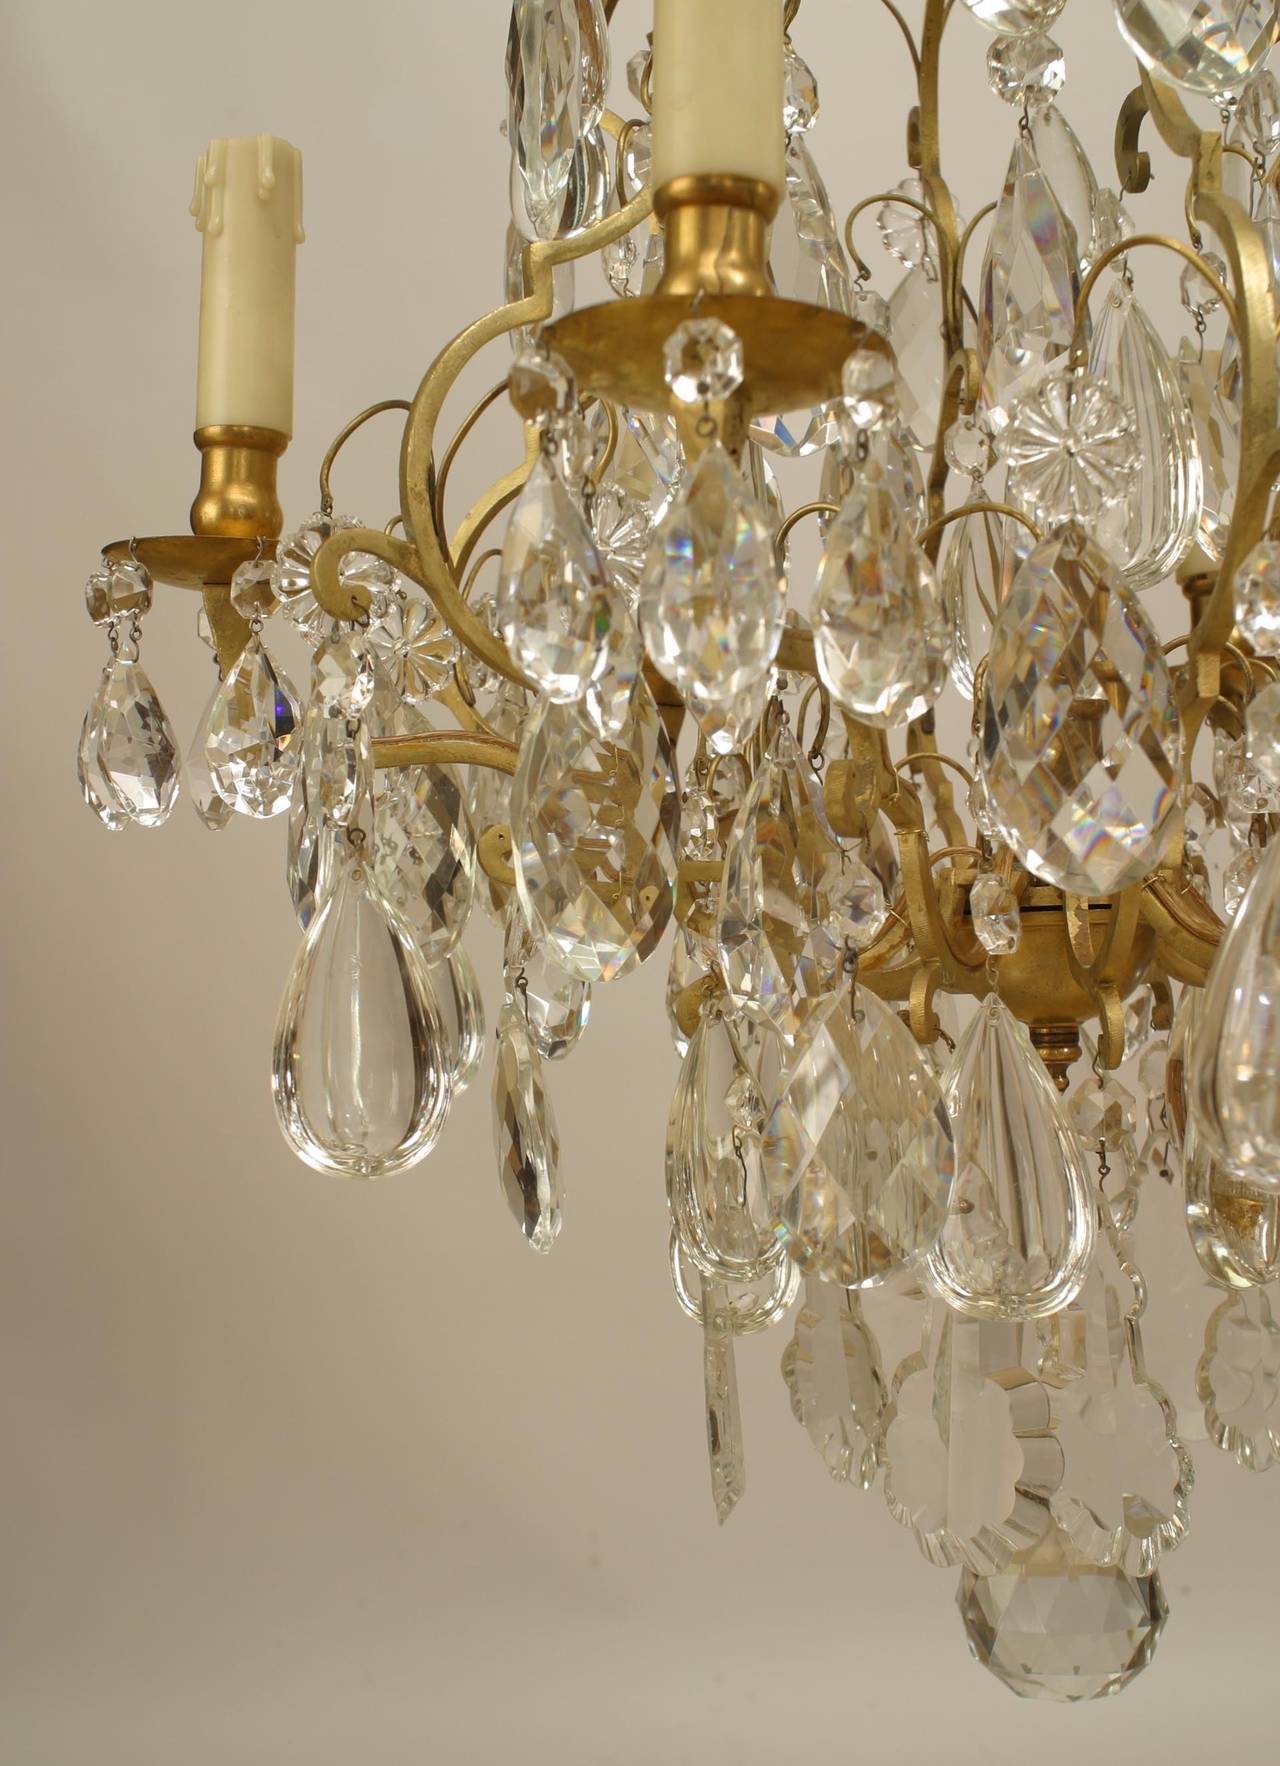 Turn of the century French Louis XV style bronze 6 light chandelier with multiple
tiers of shaped crystal drops.